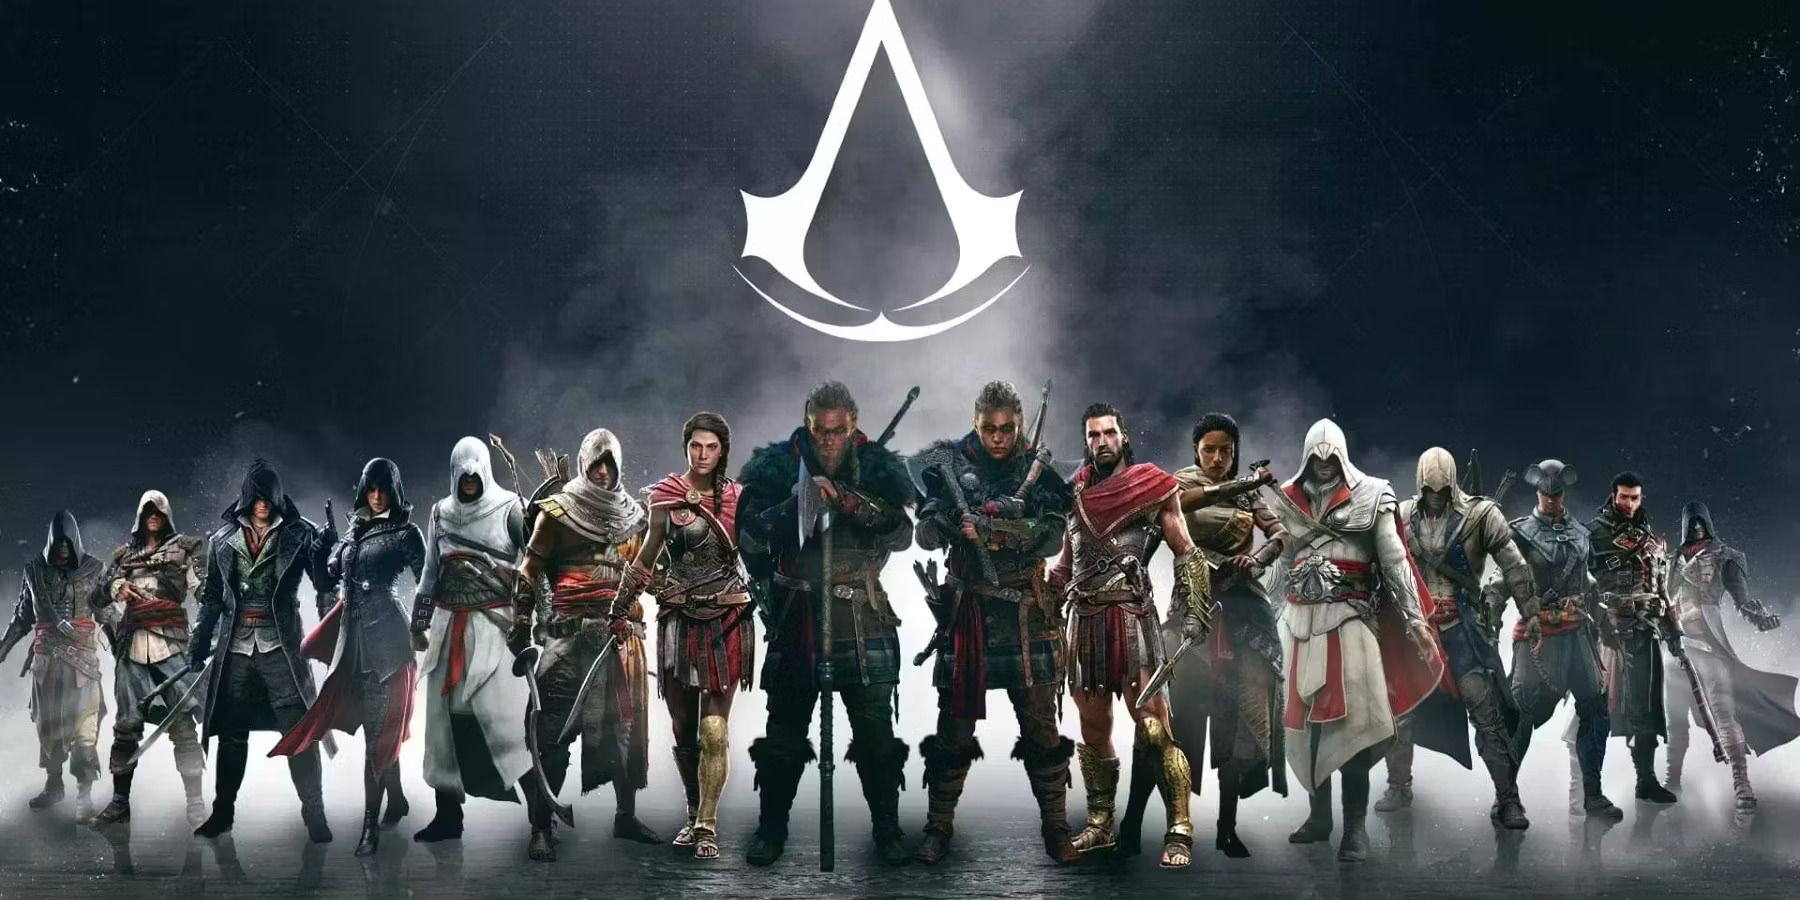 ALL ASSASSIN'S CREED FRANCHISE GAMES IN CHRONOLOGY